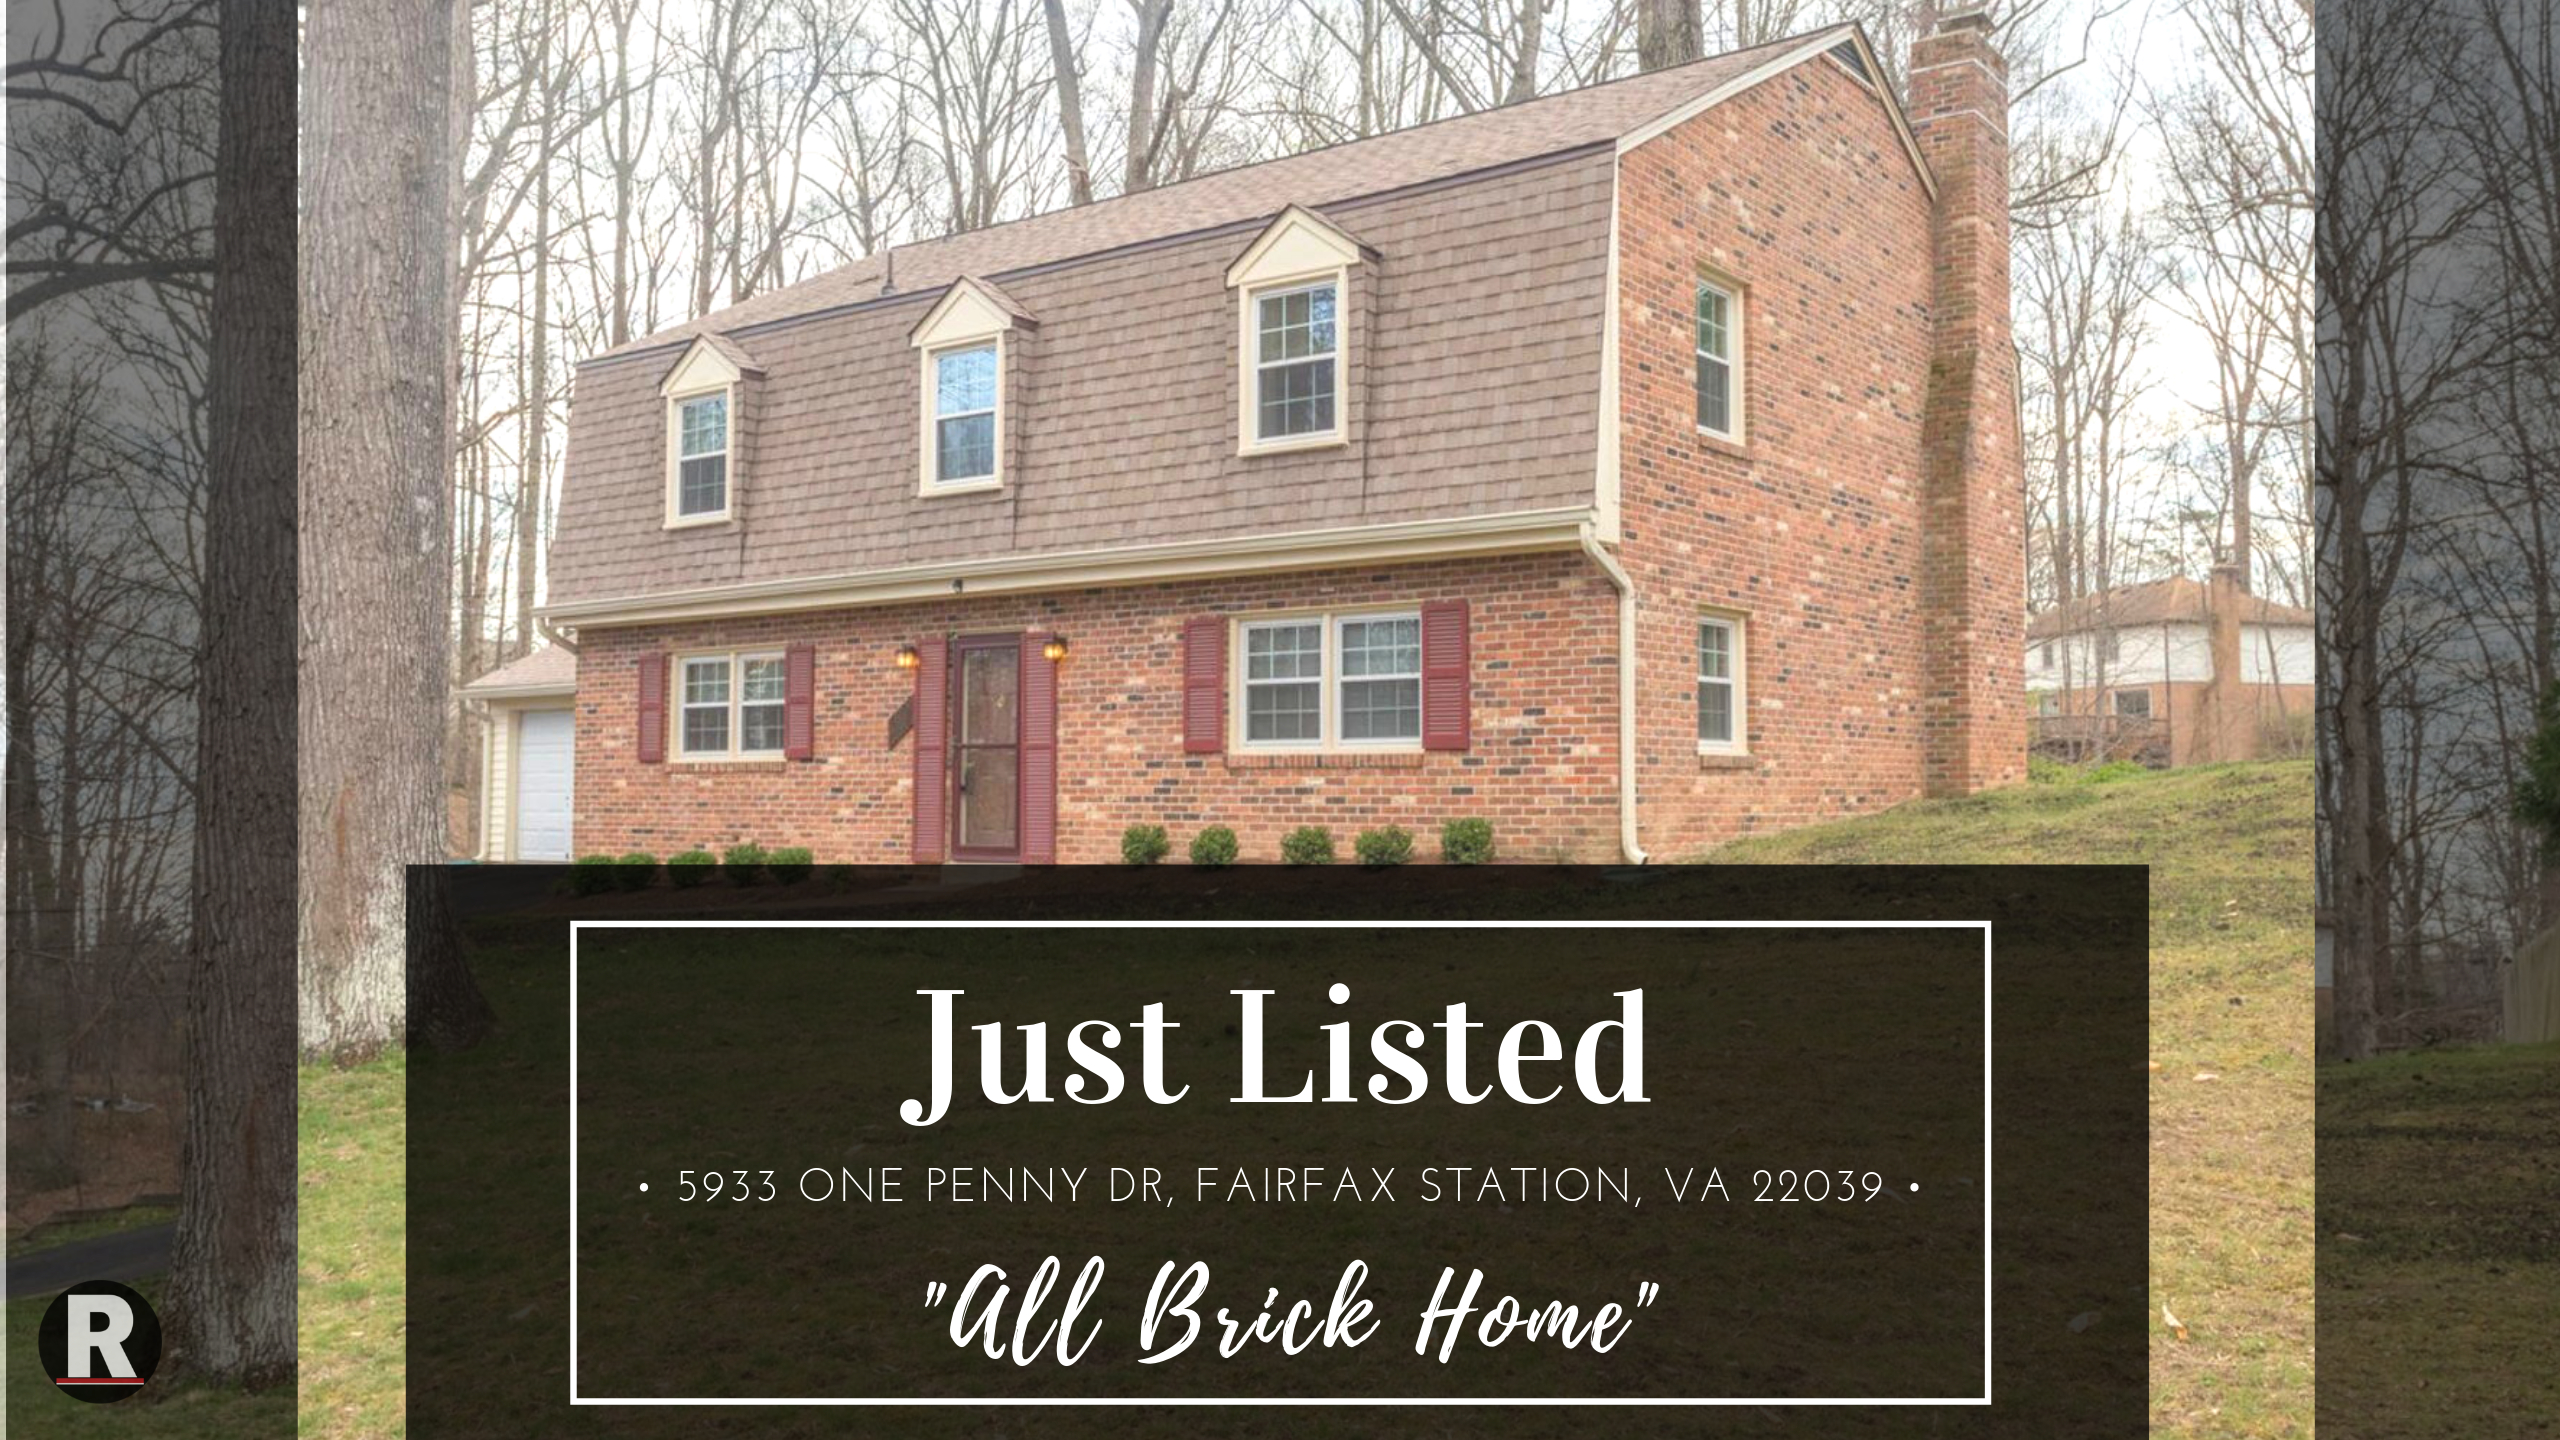 Just Listed! 5933 One Penny Dr, Fairfax Station, VA 22039